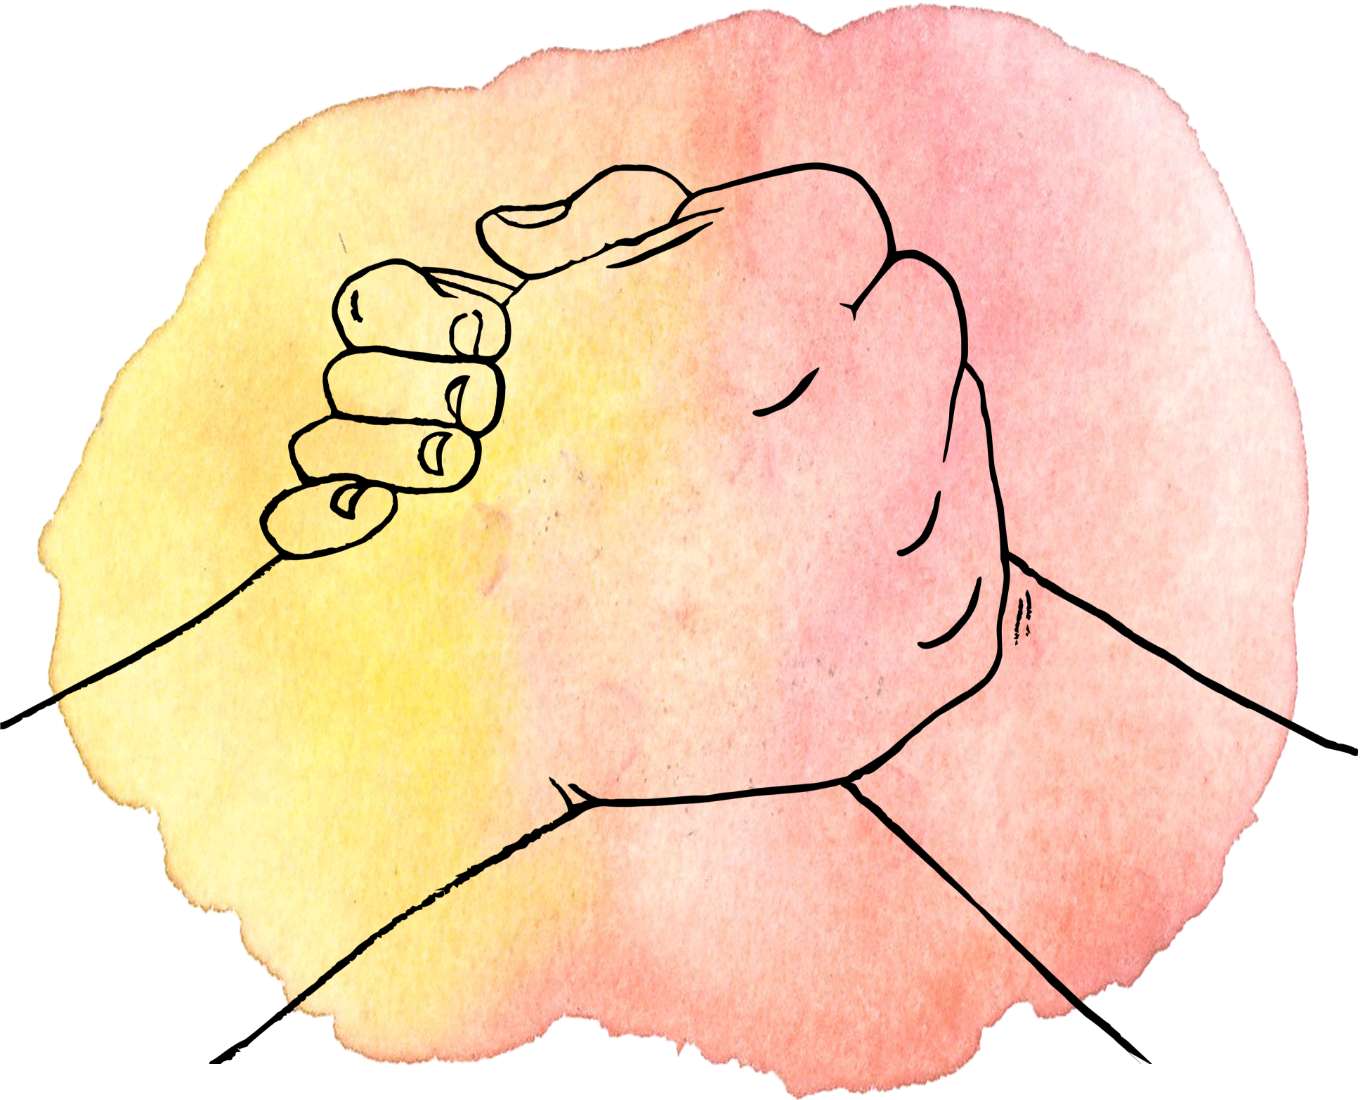 A line drawing of two hands clasping, as if helping someone up.